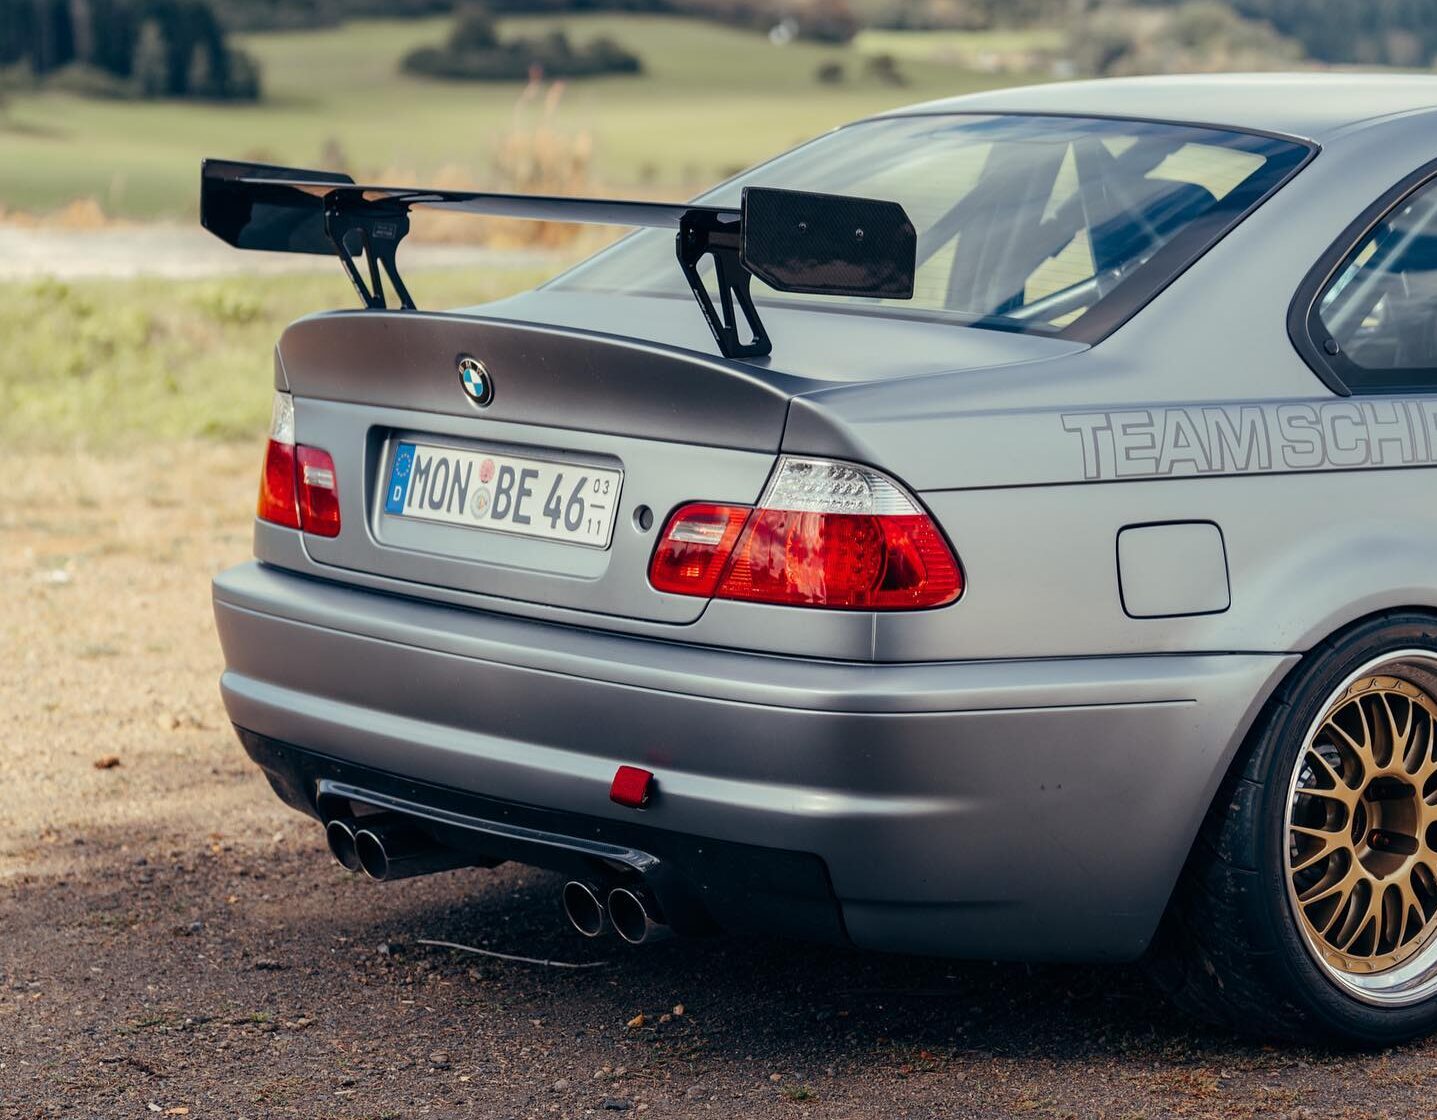 LTW Style Spoiler Installed on the E46 M3 